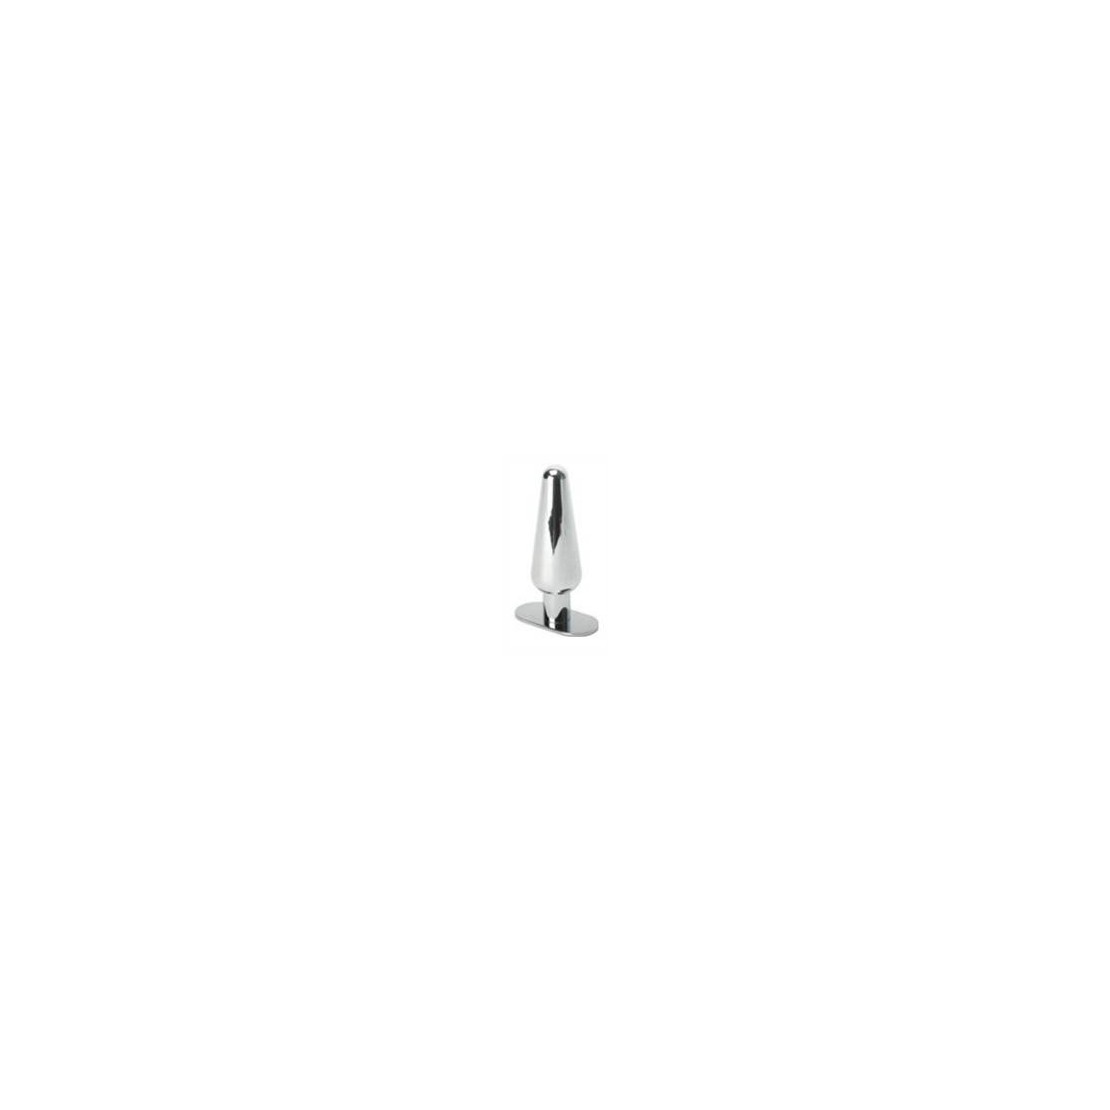  BUTT PLUG- MEDIUM TAPPO ANALE STAINLESS STEEL